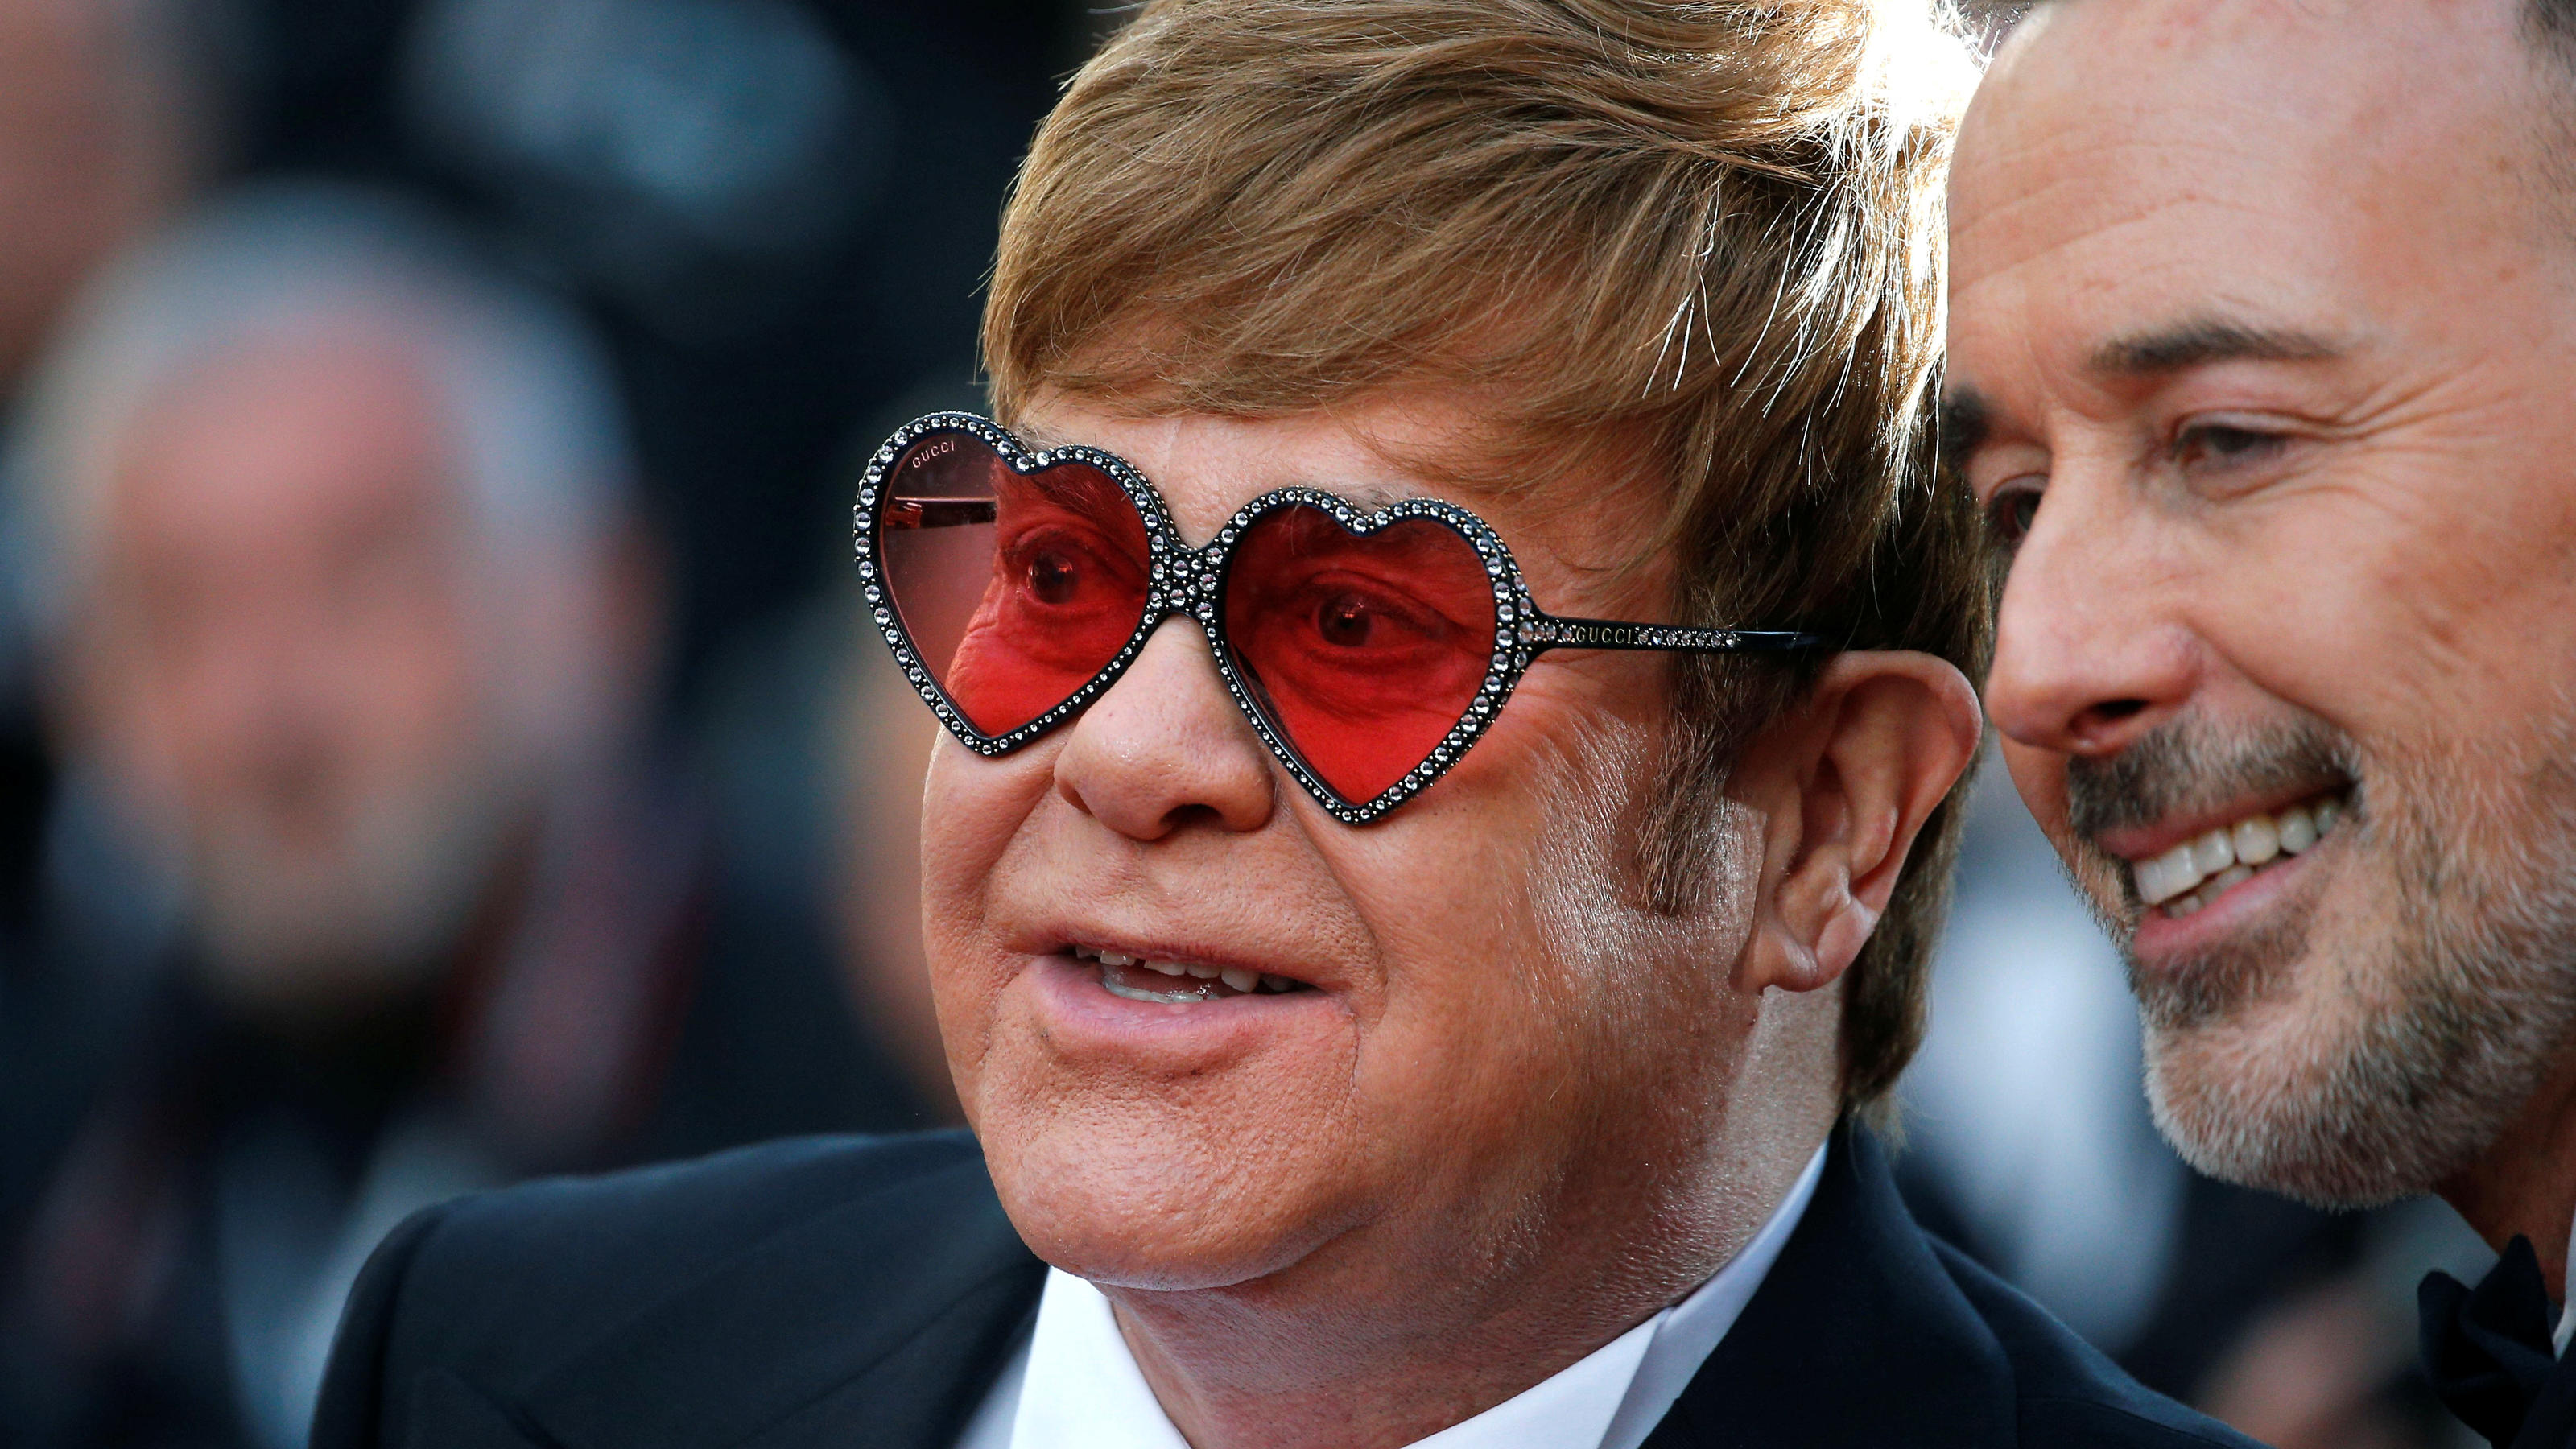 FILE PHOTO: 72nd Cannes Film Festival - Screening of the film "Rocketman" out of competition - Red Carpet Arrivals - Cannes, France, May 16, 2019. Elton John poses with David Furnish. REUTERS/Stephane Mahe/File Photo